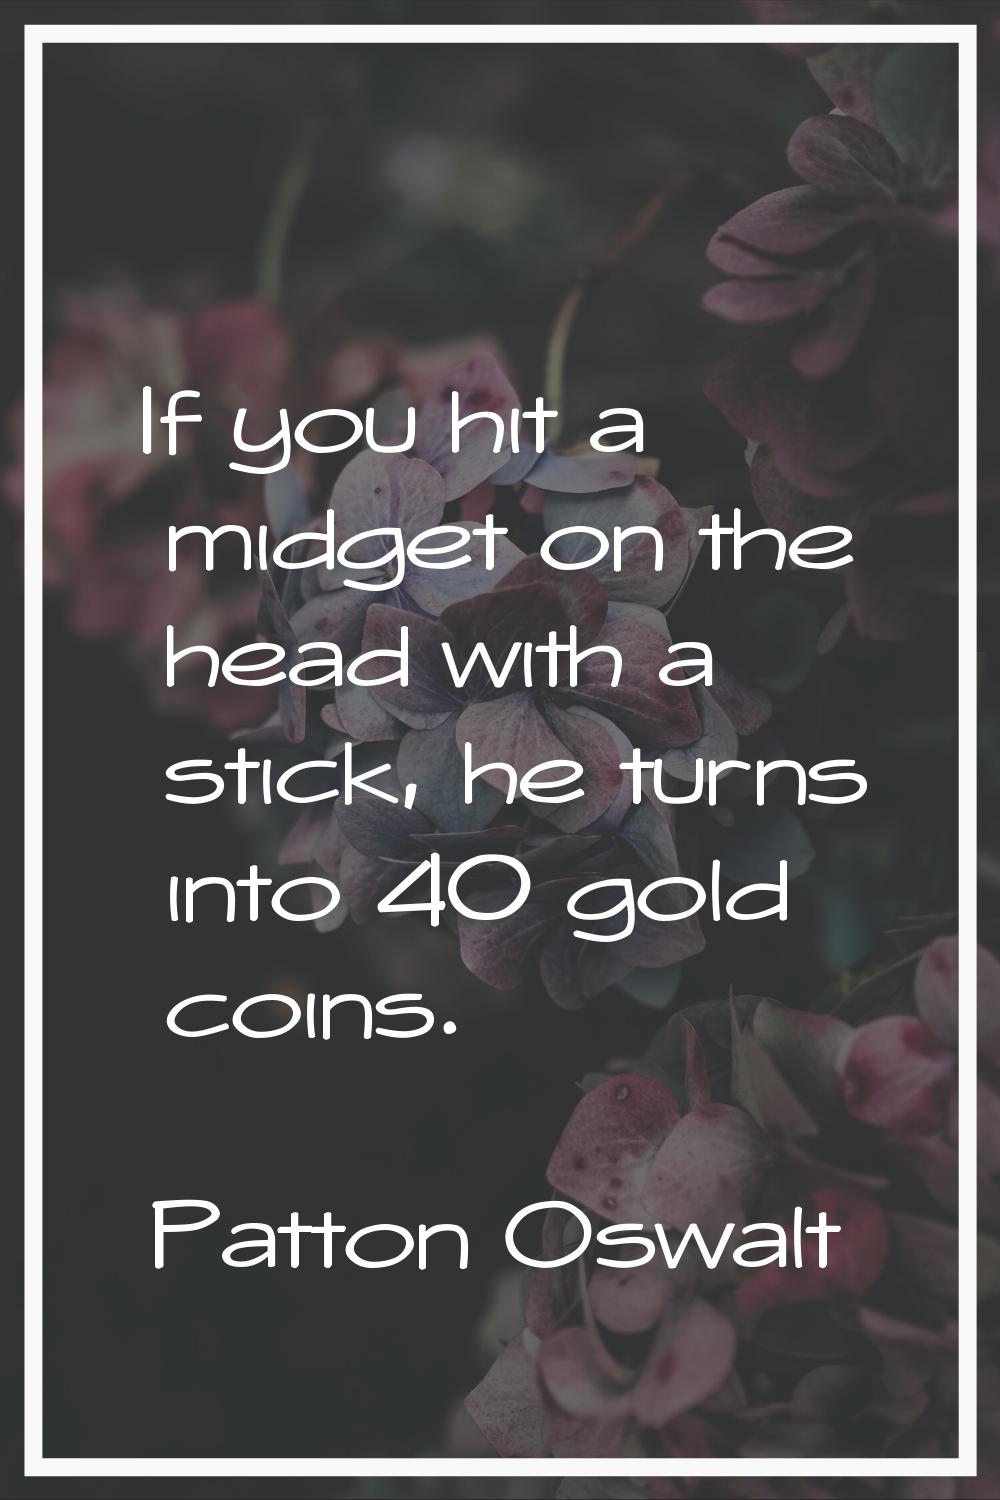 If you hit a midget on the head with a stick, he turns into 40 gold coins.